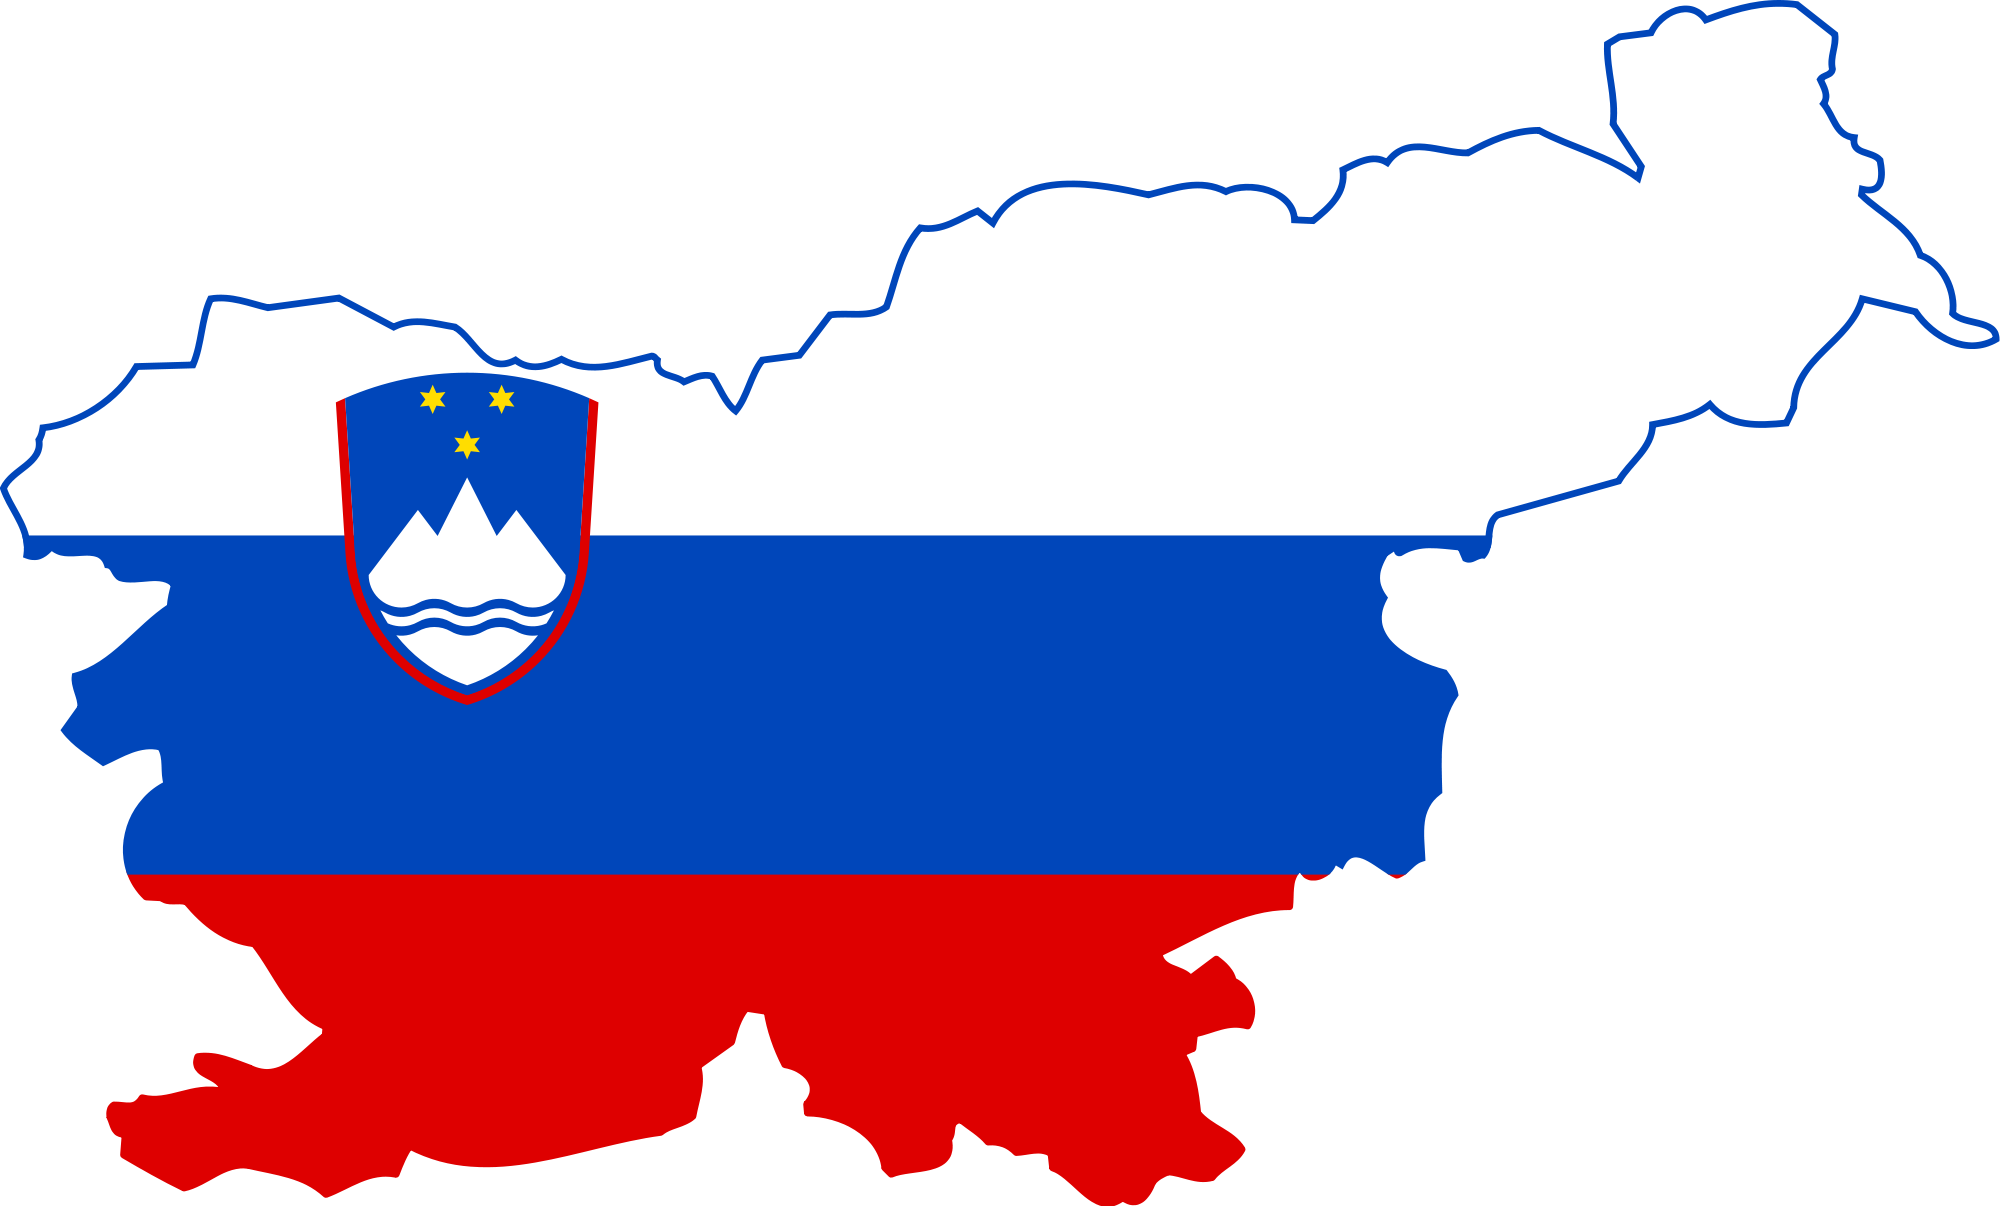 Slovenia Joins Project Mine - Slovenia Flag And Map (2000x1206)